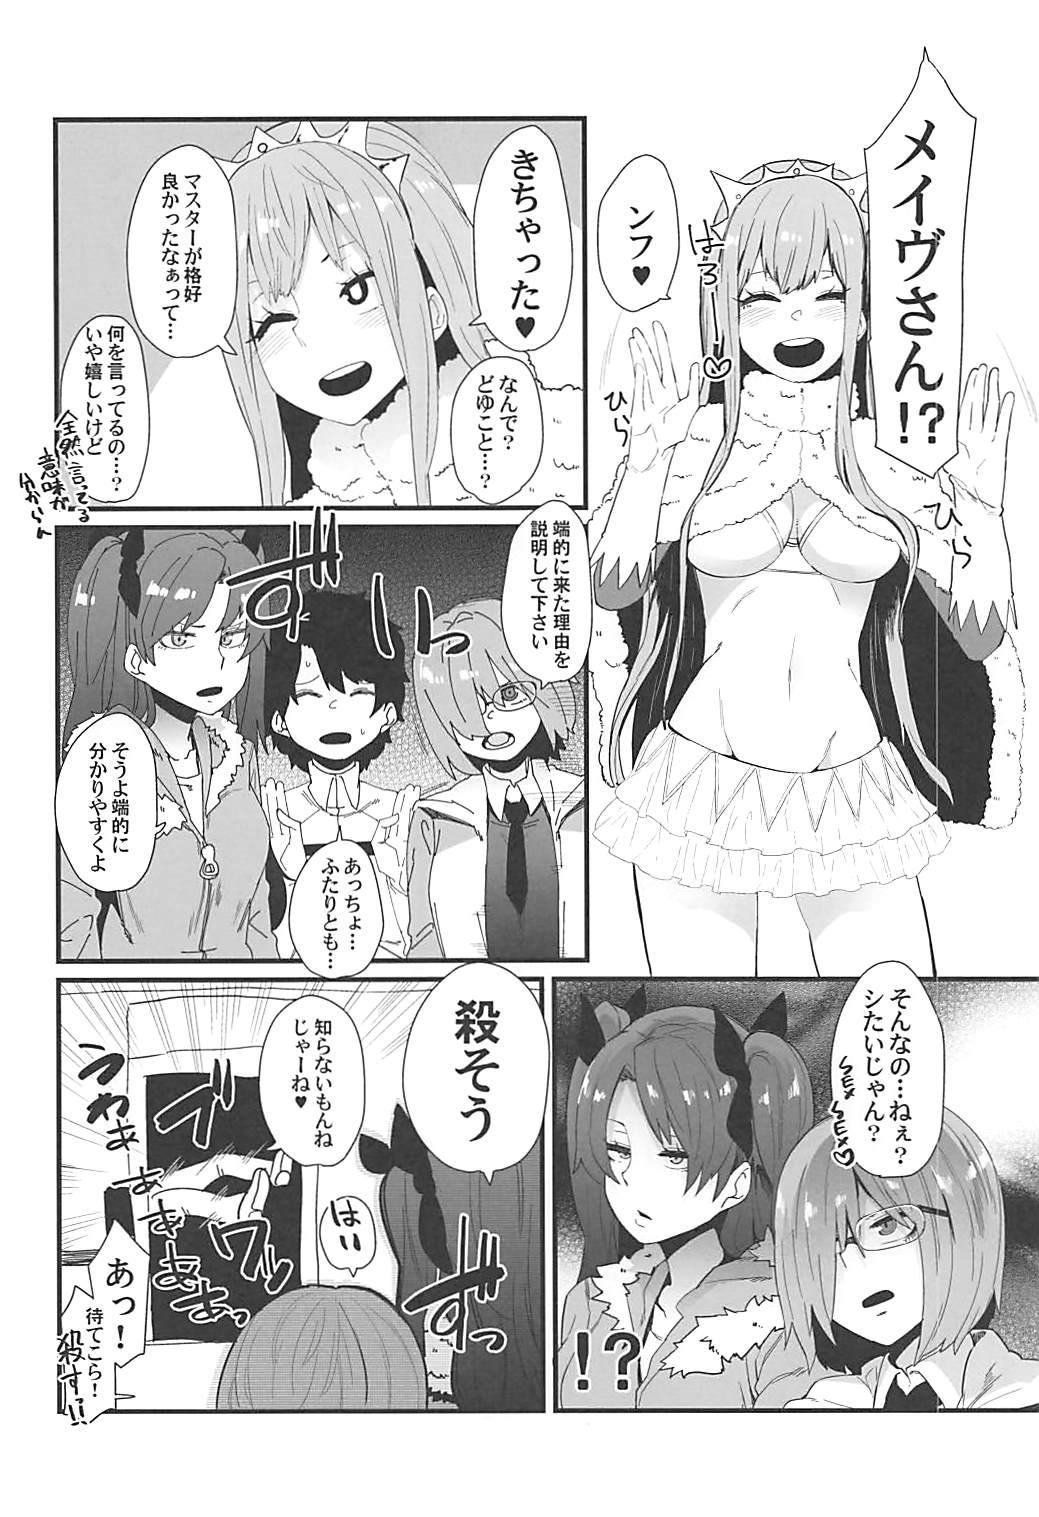 Soapy Gouyoku - In Greedy - Fate grand order Gay Pawn - Page 3